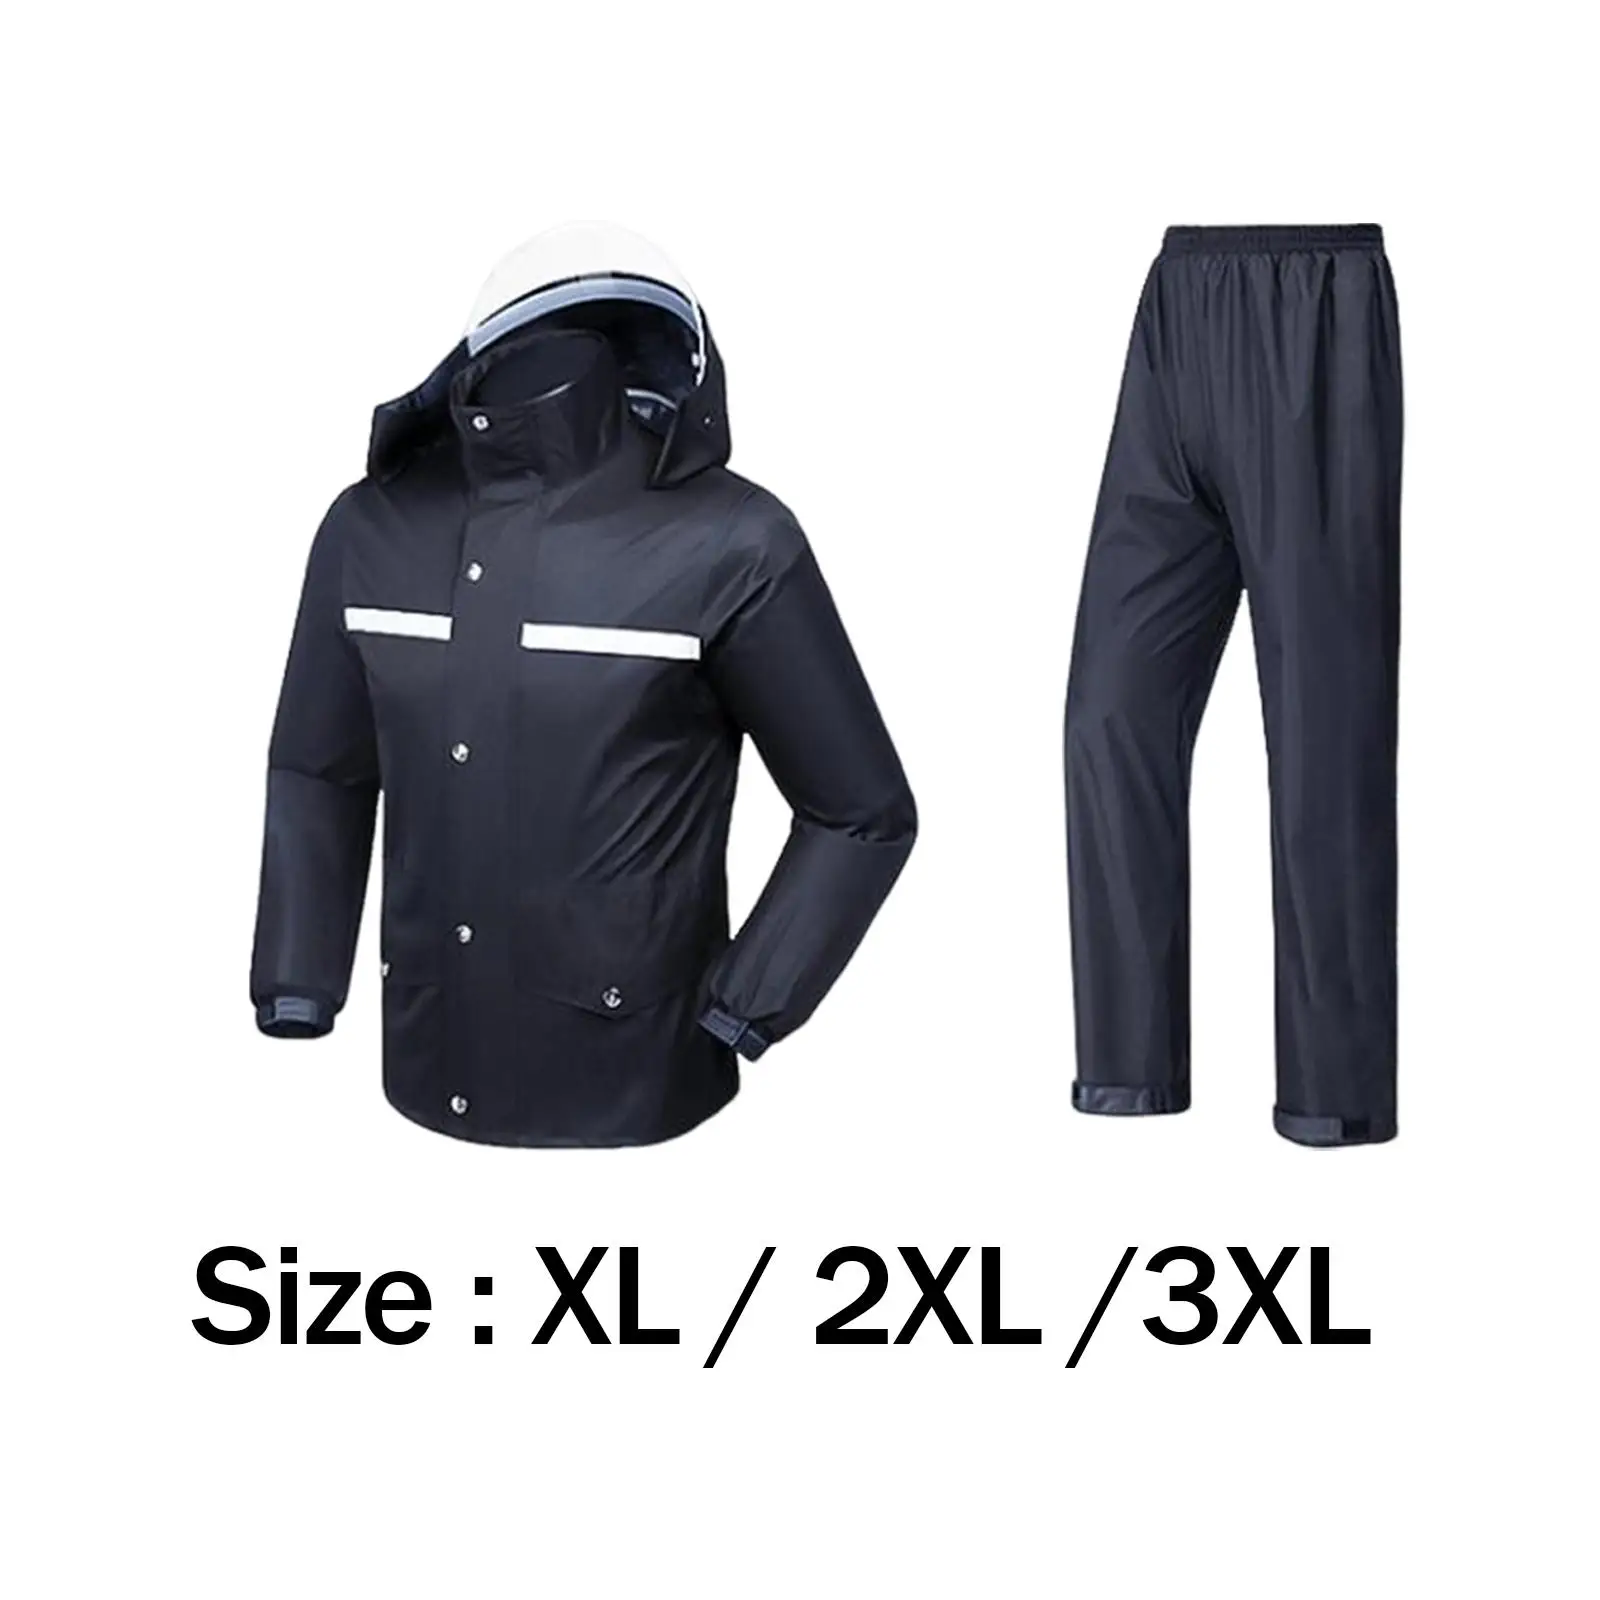 Rain Suit Jacket and Trouser Suit Hooded Zipper Closure Double Front Pockets Elastic Breathable Waterproof for Heavy Duty Rain